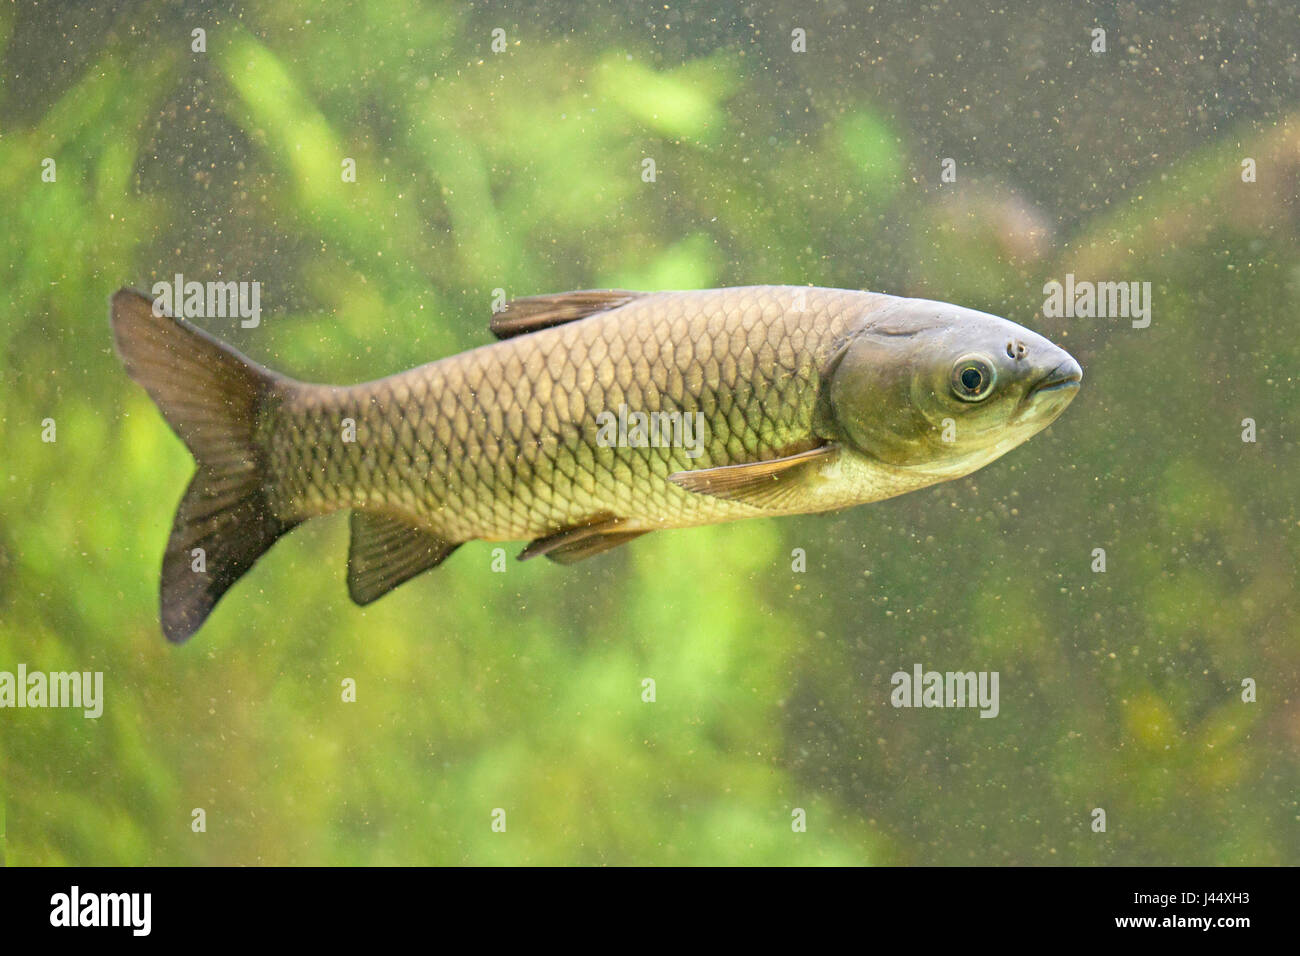 photo of a swimming grass carp against a green background Stock Photo